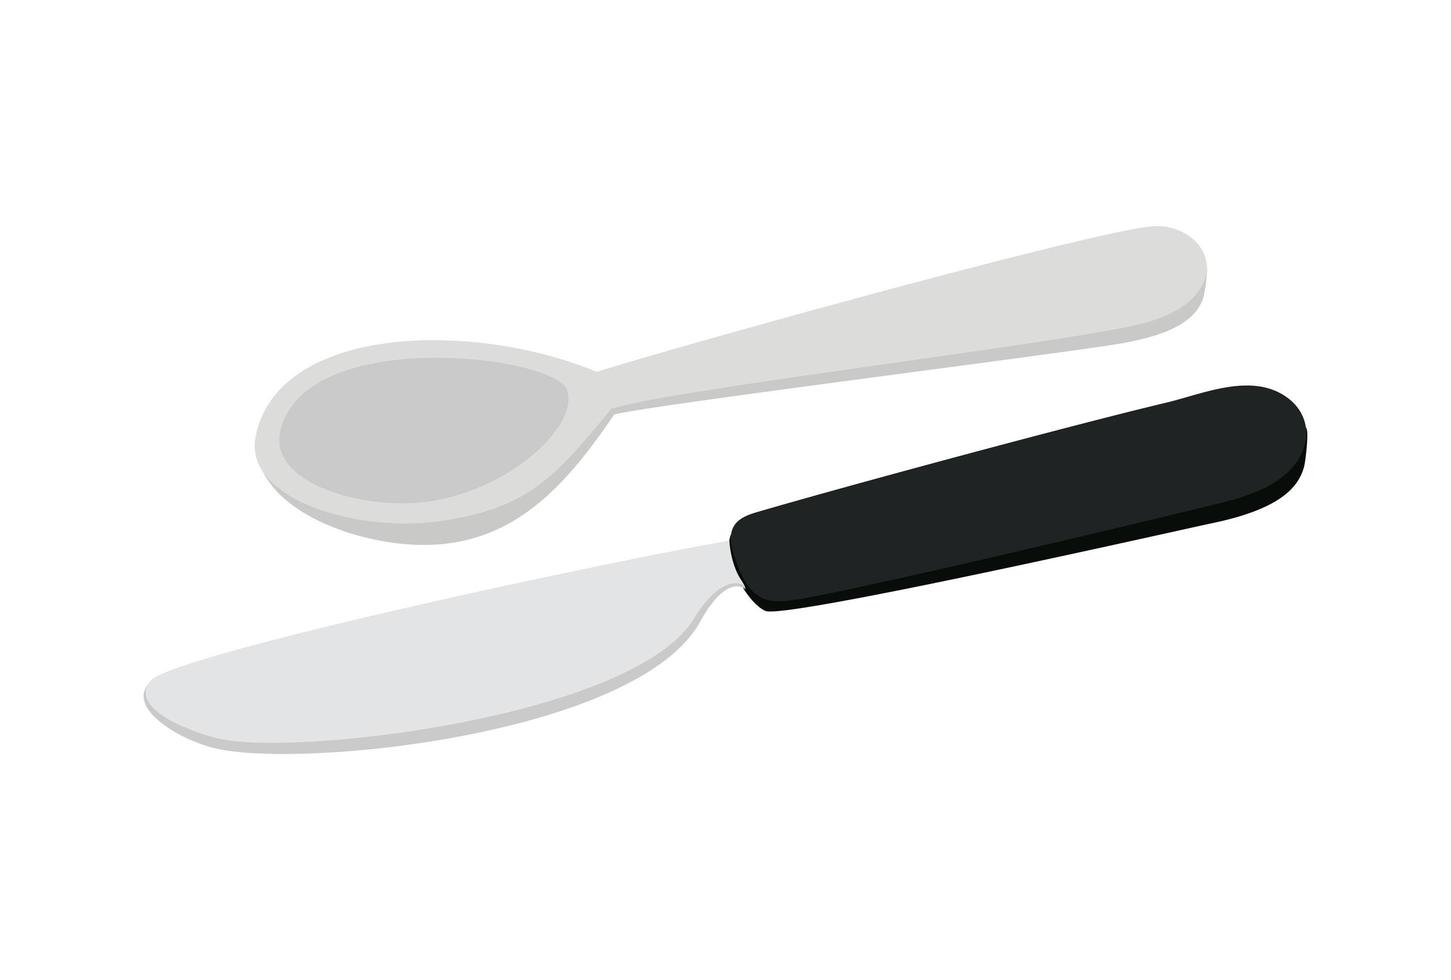 spoon and knife on white background vector